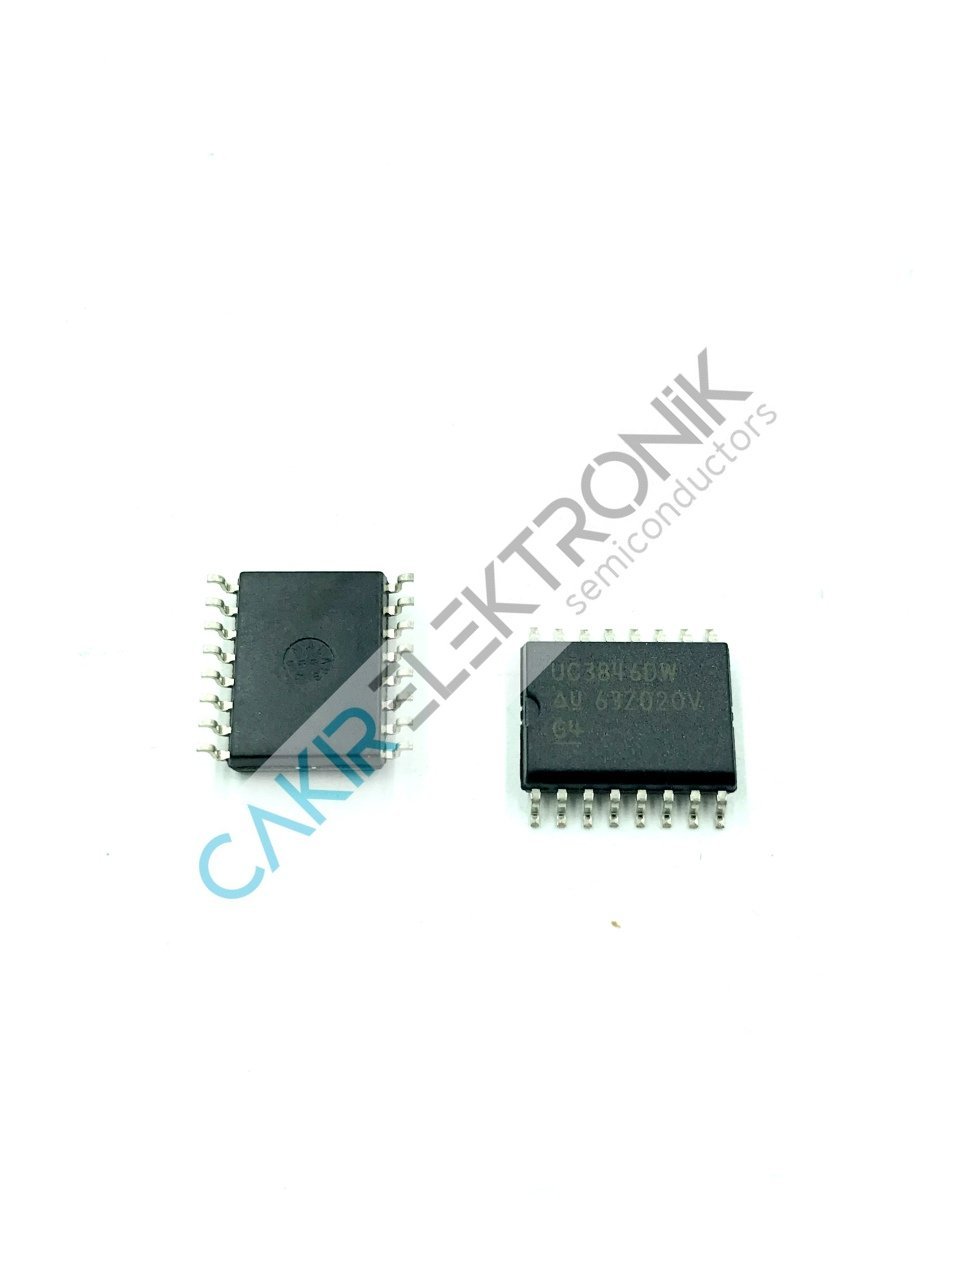 UC3846DW - UC3846 - Current Mode PWM Controller